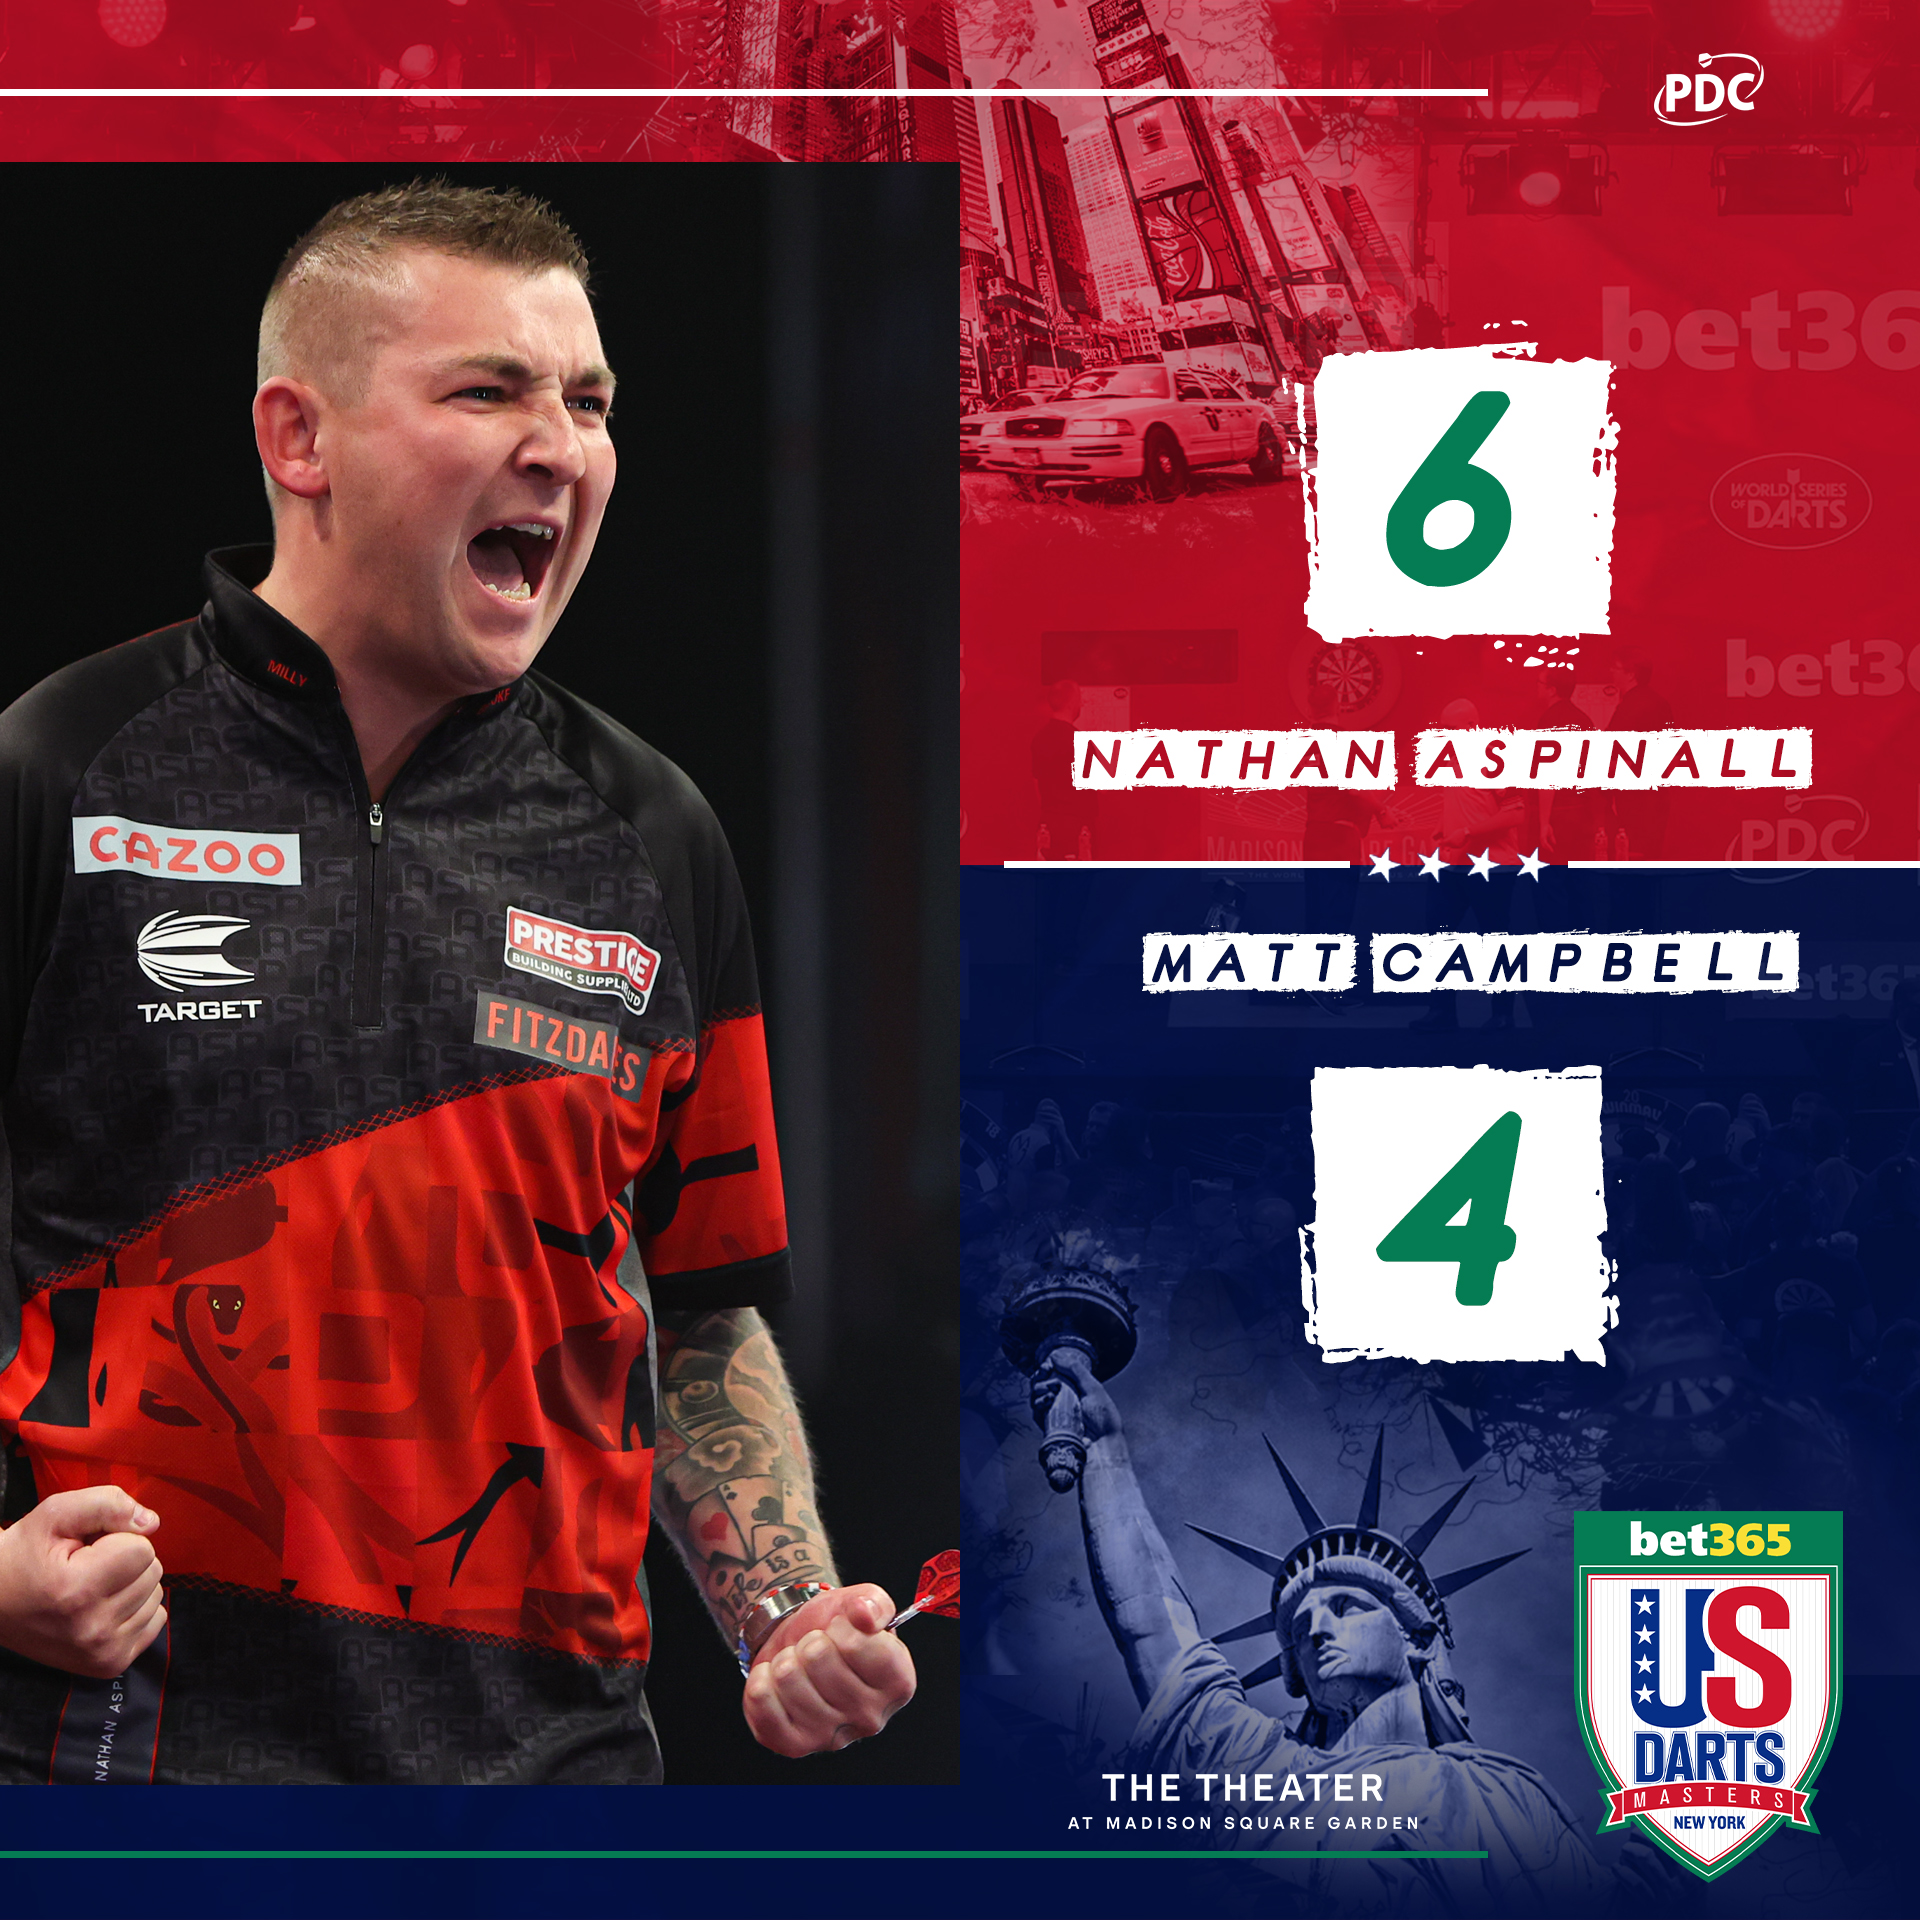 PDC Darts on Twitter: "CLINICAL ASP ADVANCES! 🐍 Nathan Aspinall nails 6/6 and averages 105.81 in an impressive win over Matt Campbell. 📺 https://t.co/2cV1j0CA6X | R1 https://t.co/Cc6G8OMsAn" Twitter